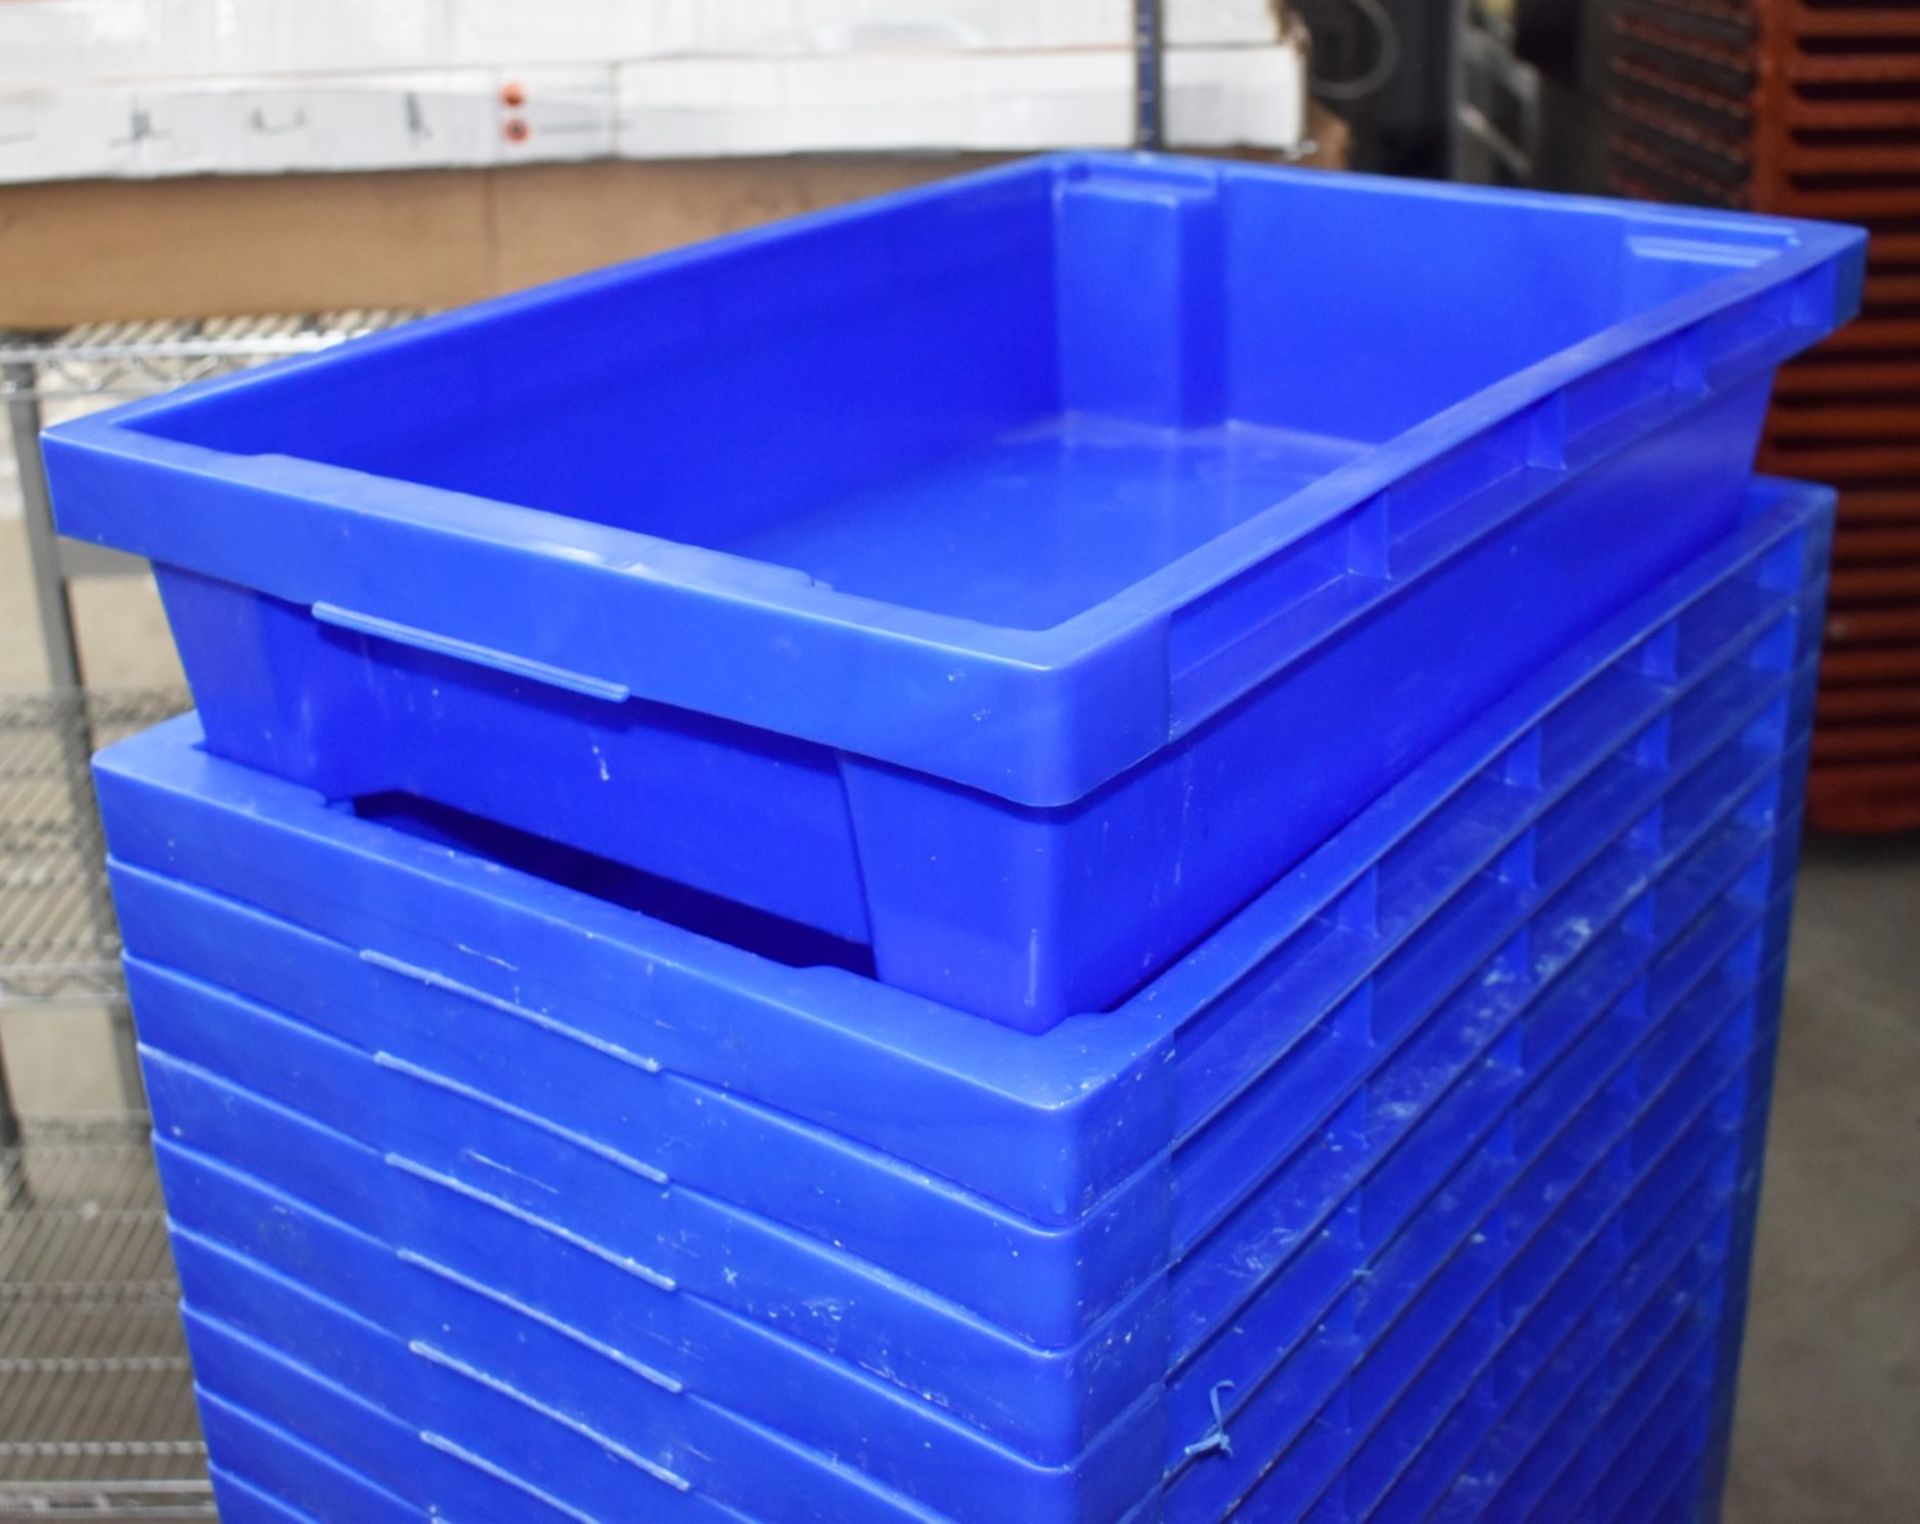 27 x Plastic Stackable Storage Trays in Blue - Includes Mobile Platform Dolly on Castors - Tray - Image 6 of 7